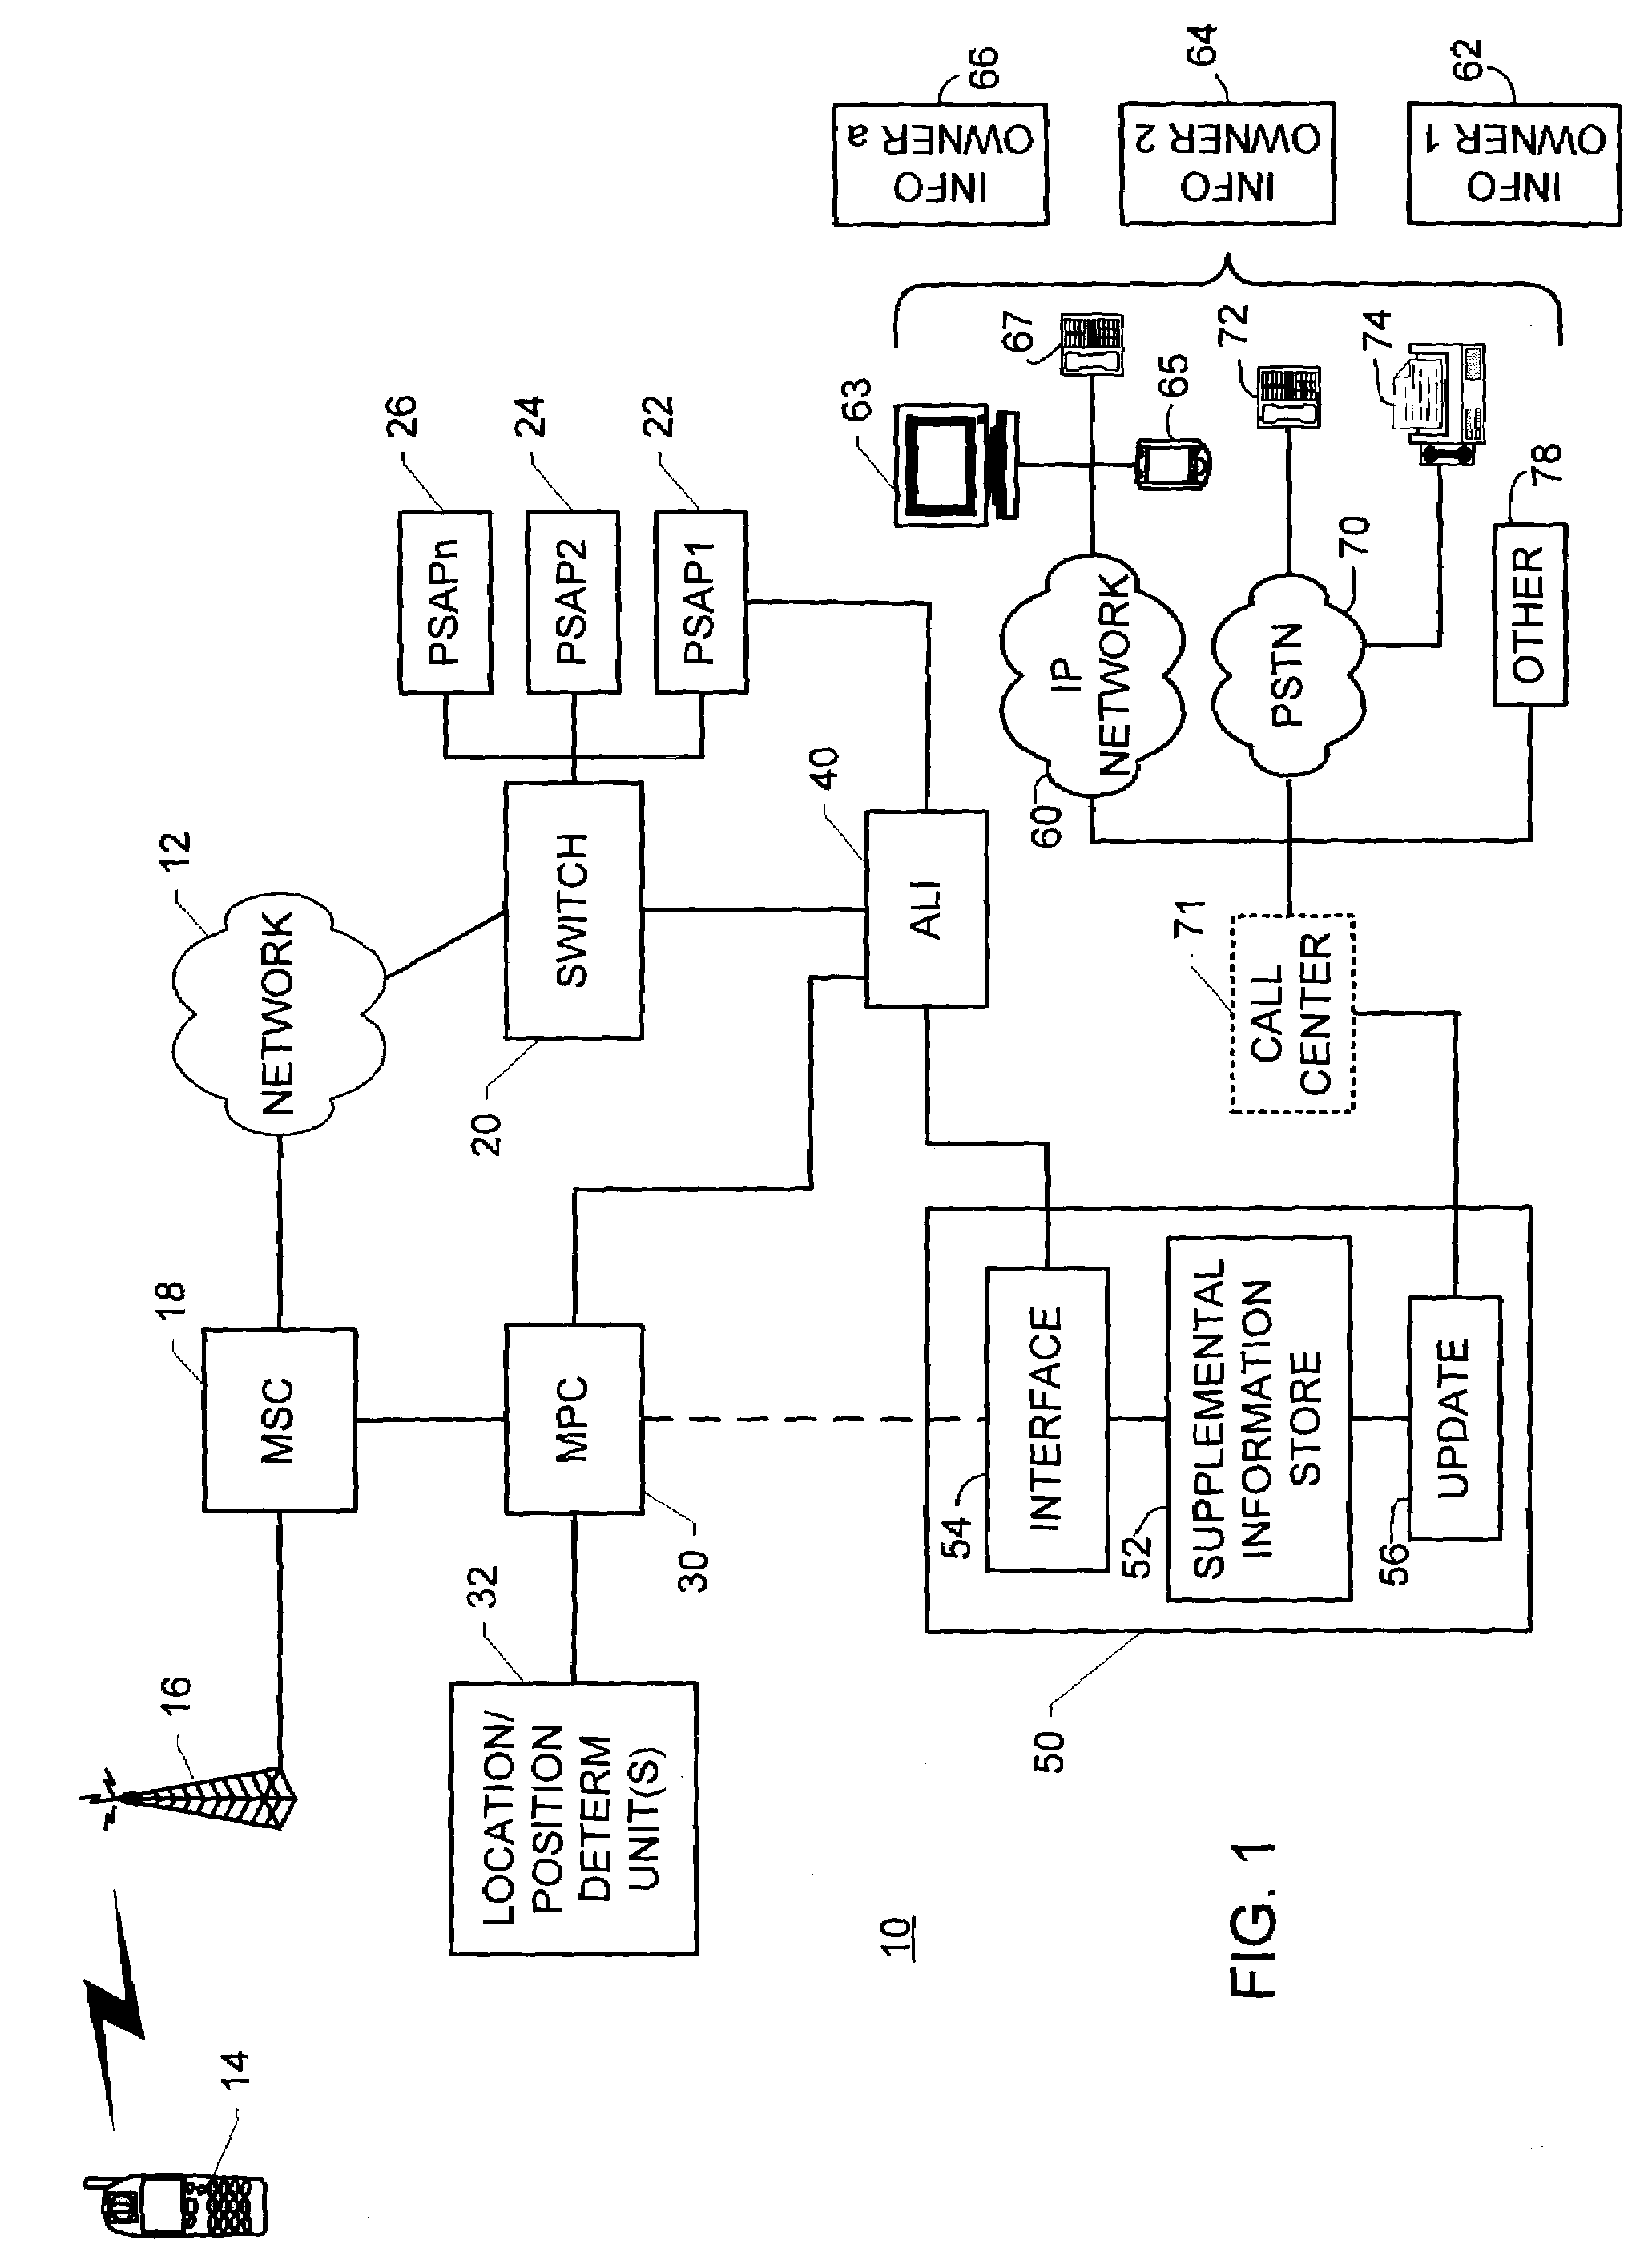 System and method for providing mobile caller information to a special number service station